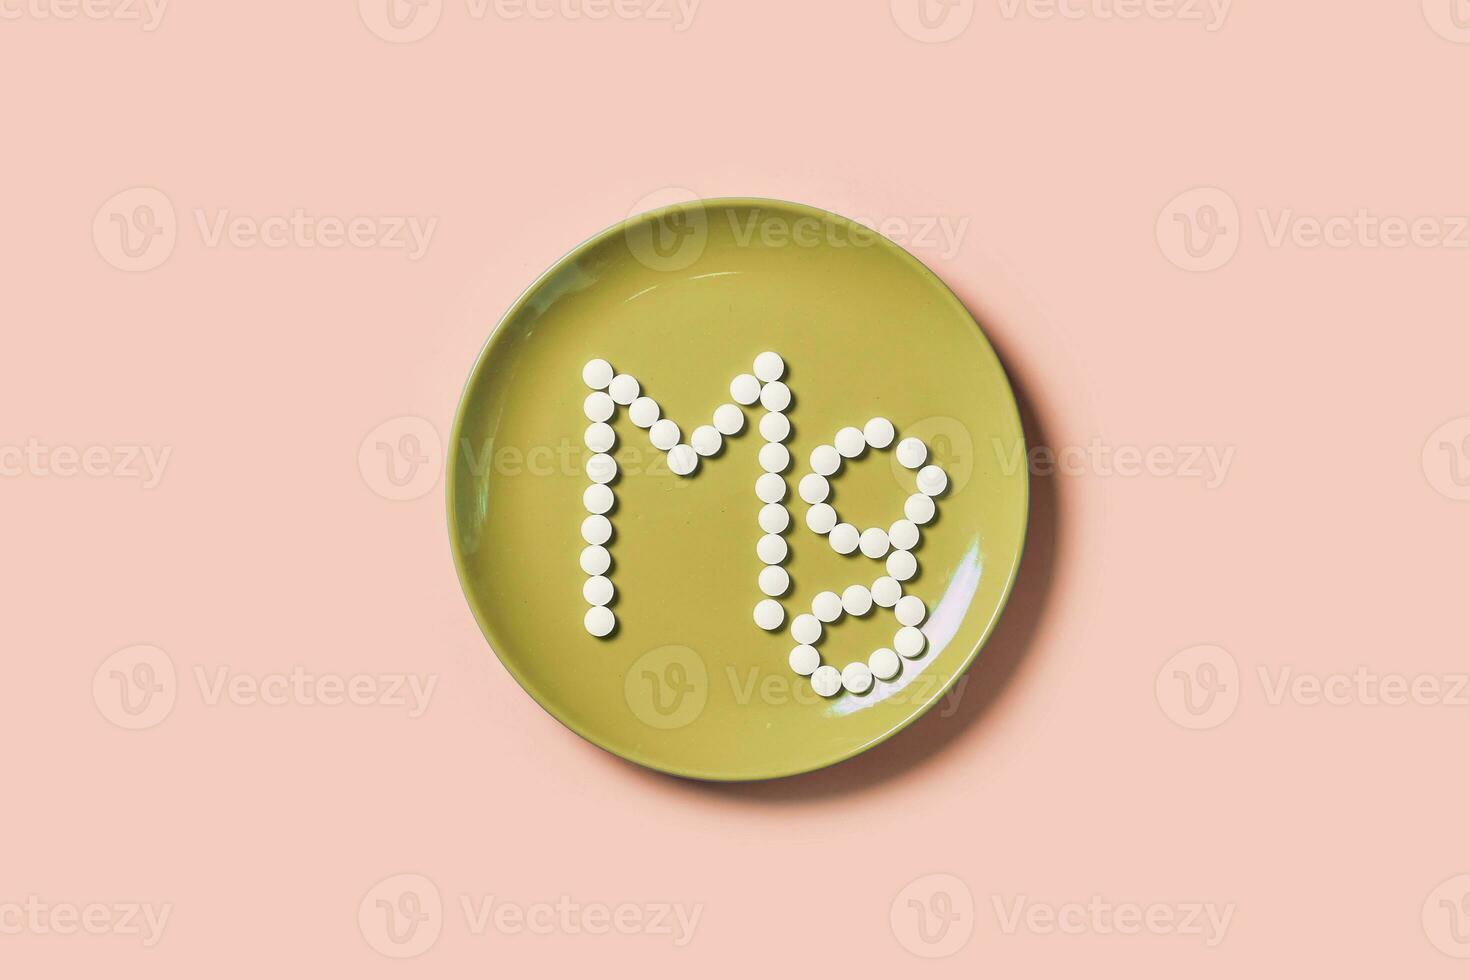 MG text. Symbol of magnesium on plate photo